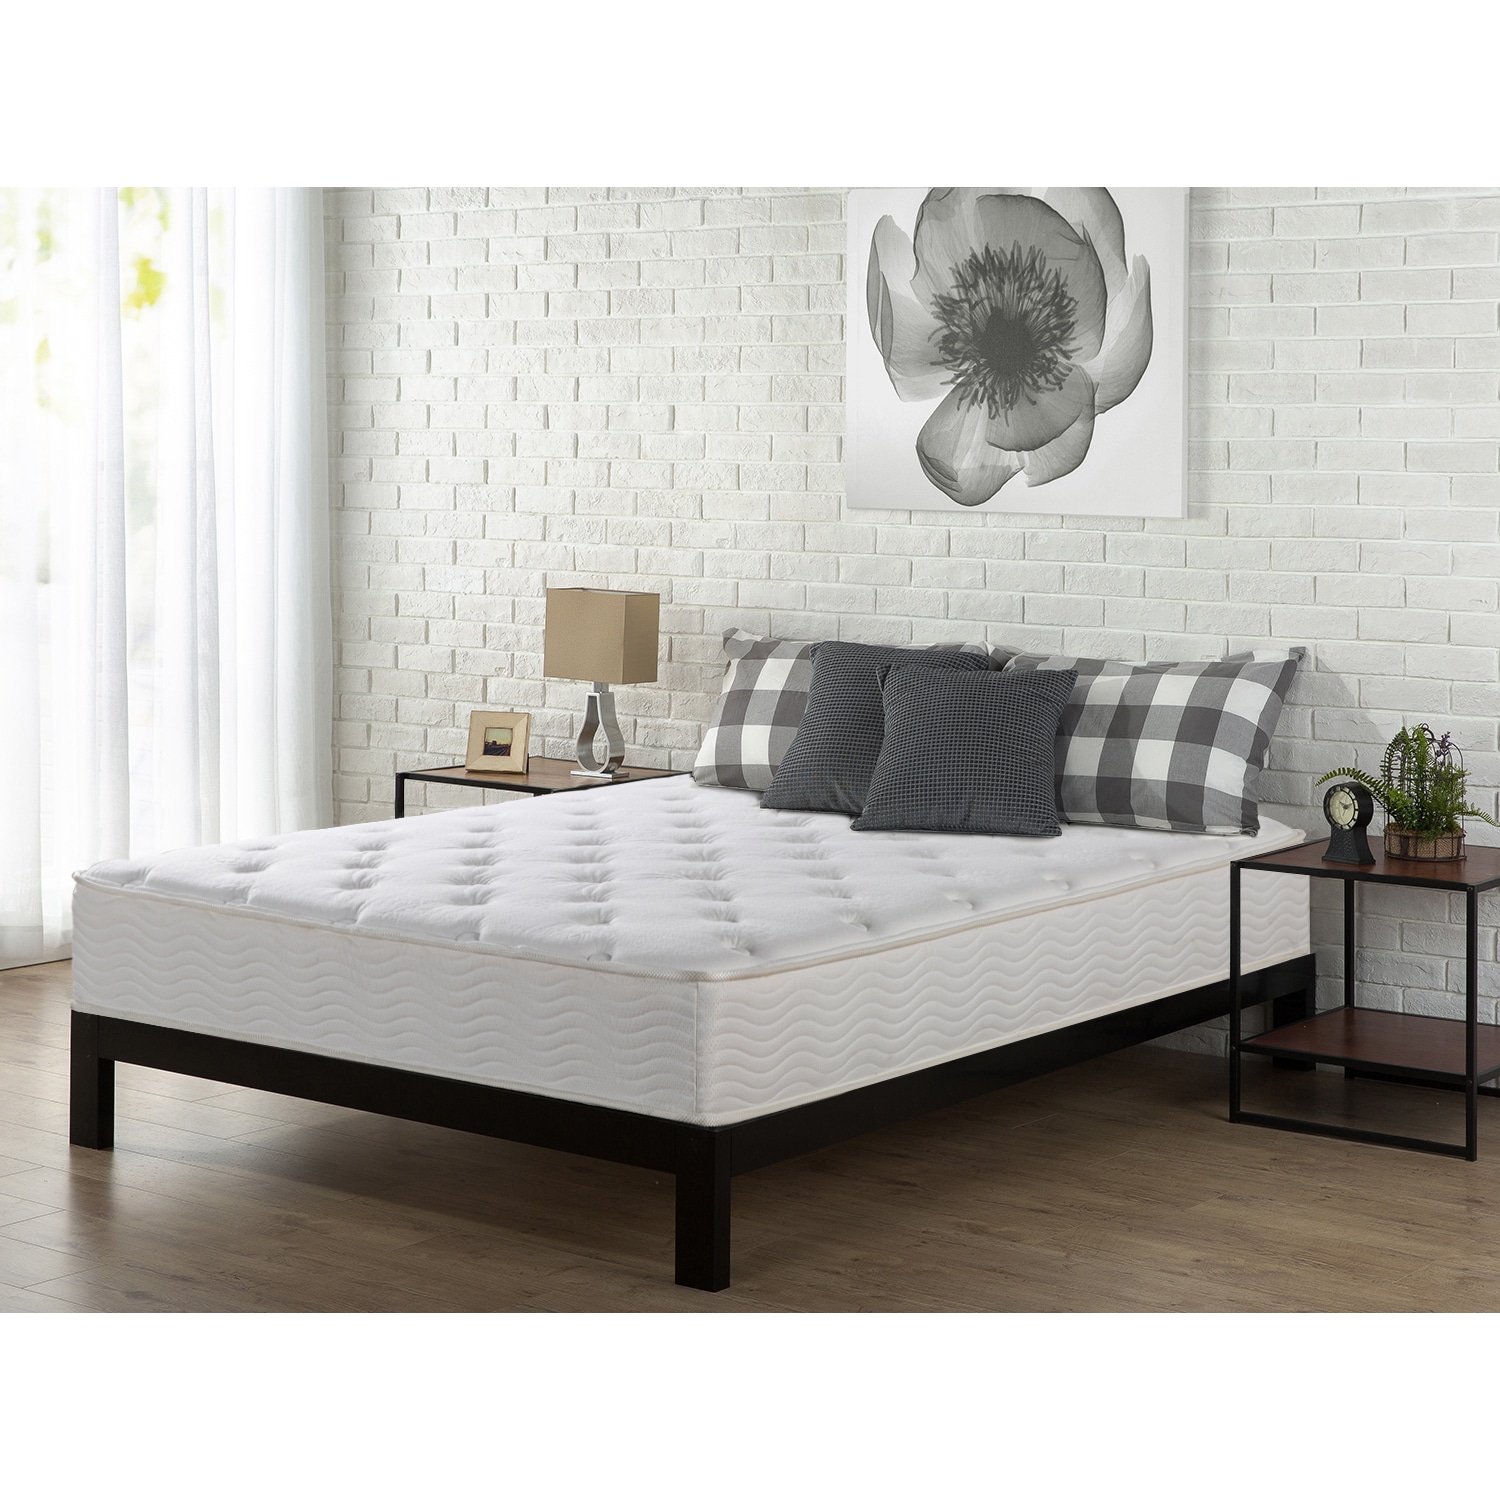 Shop Priage 10 Inch Queen Size Tight Top Spring Mattress Free Shipping Today